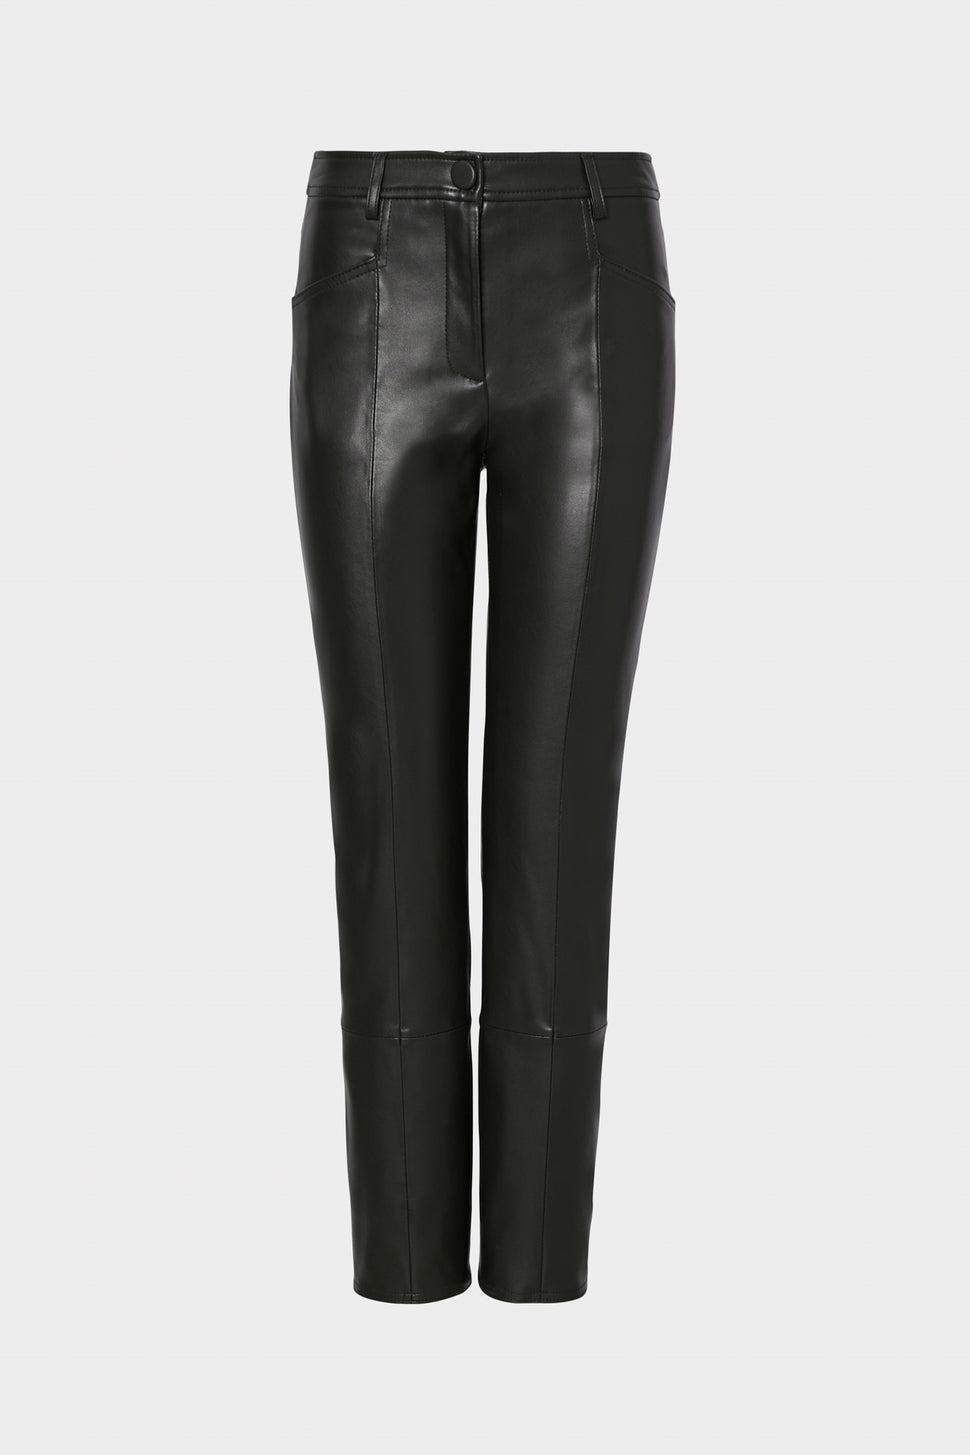 Jeans Style Leather Pants with Ankle Zips